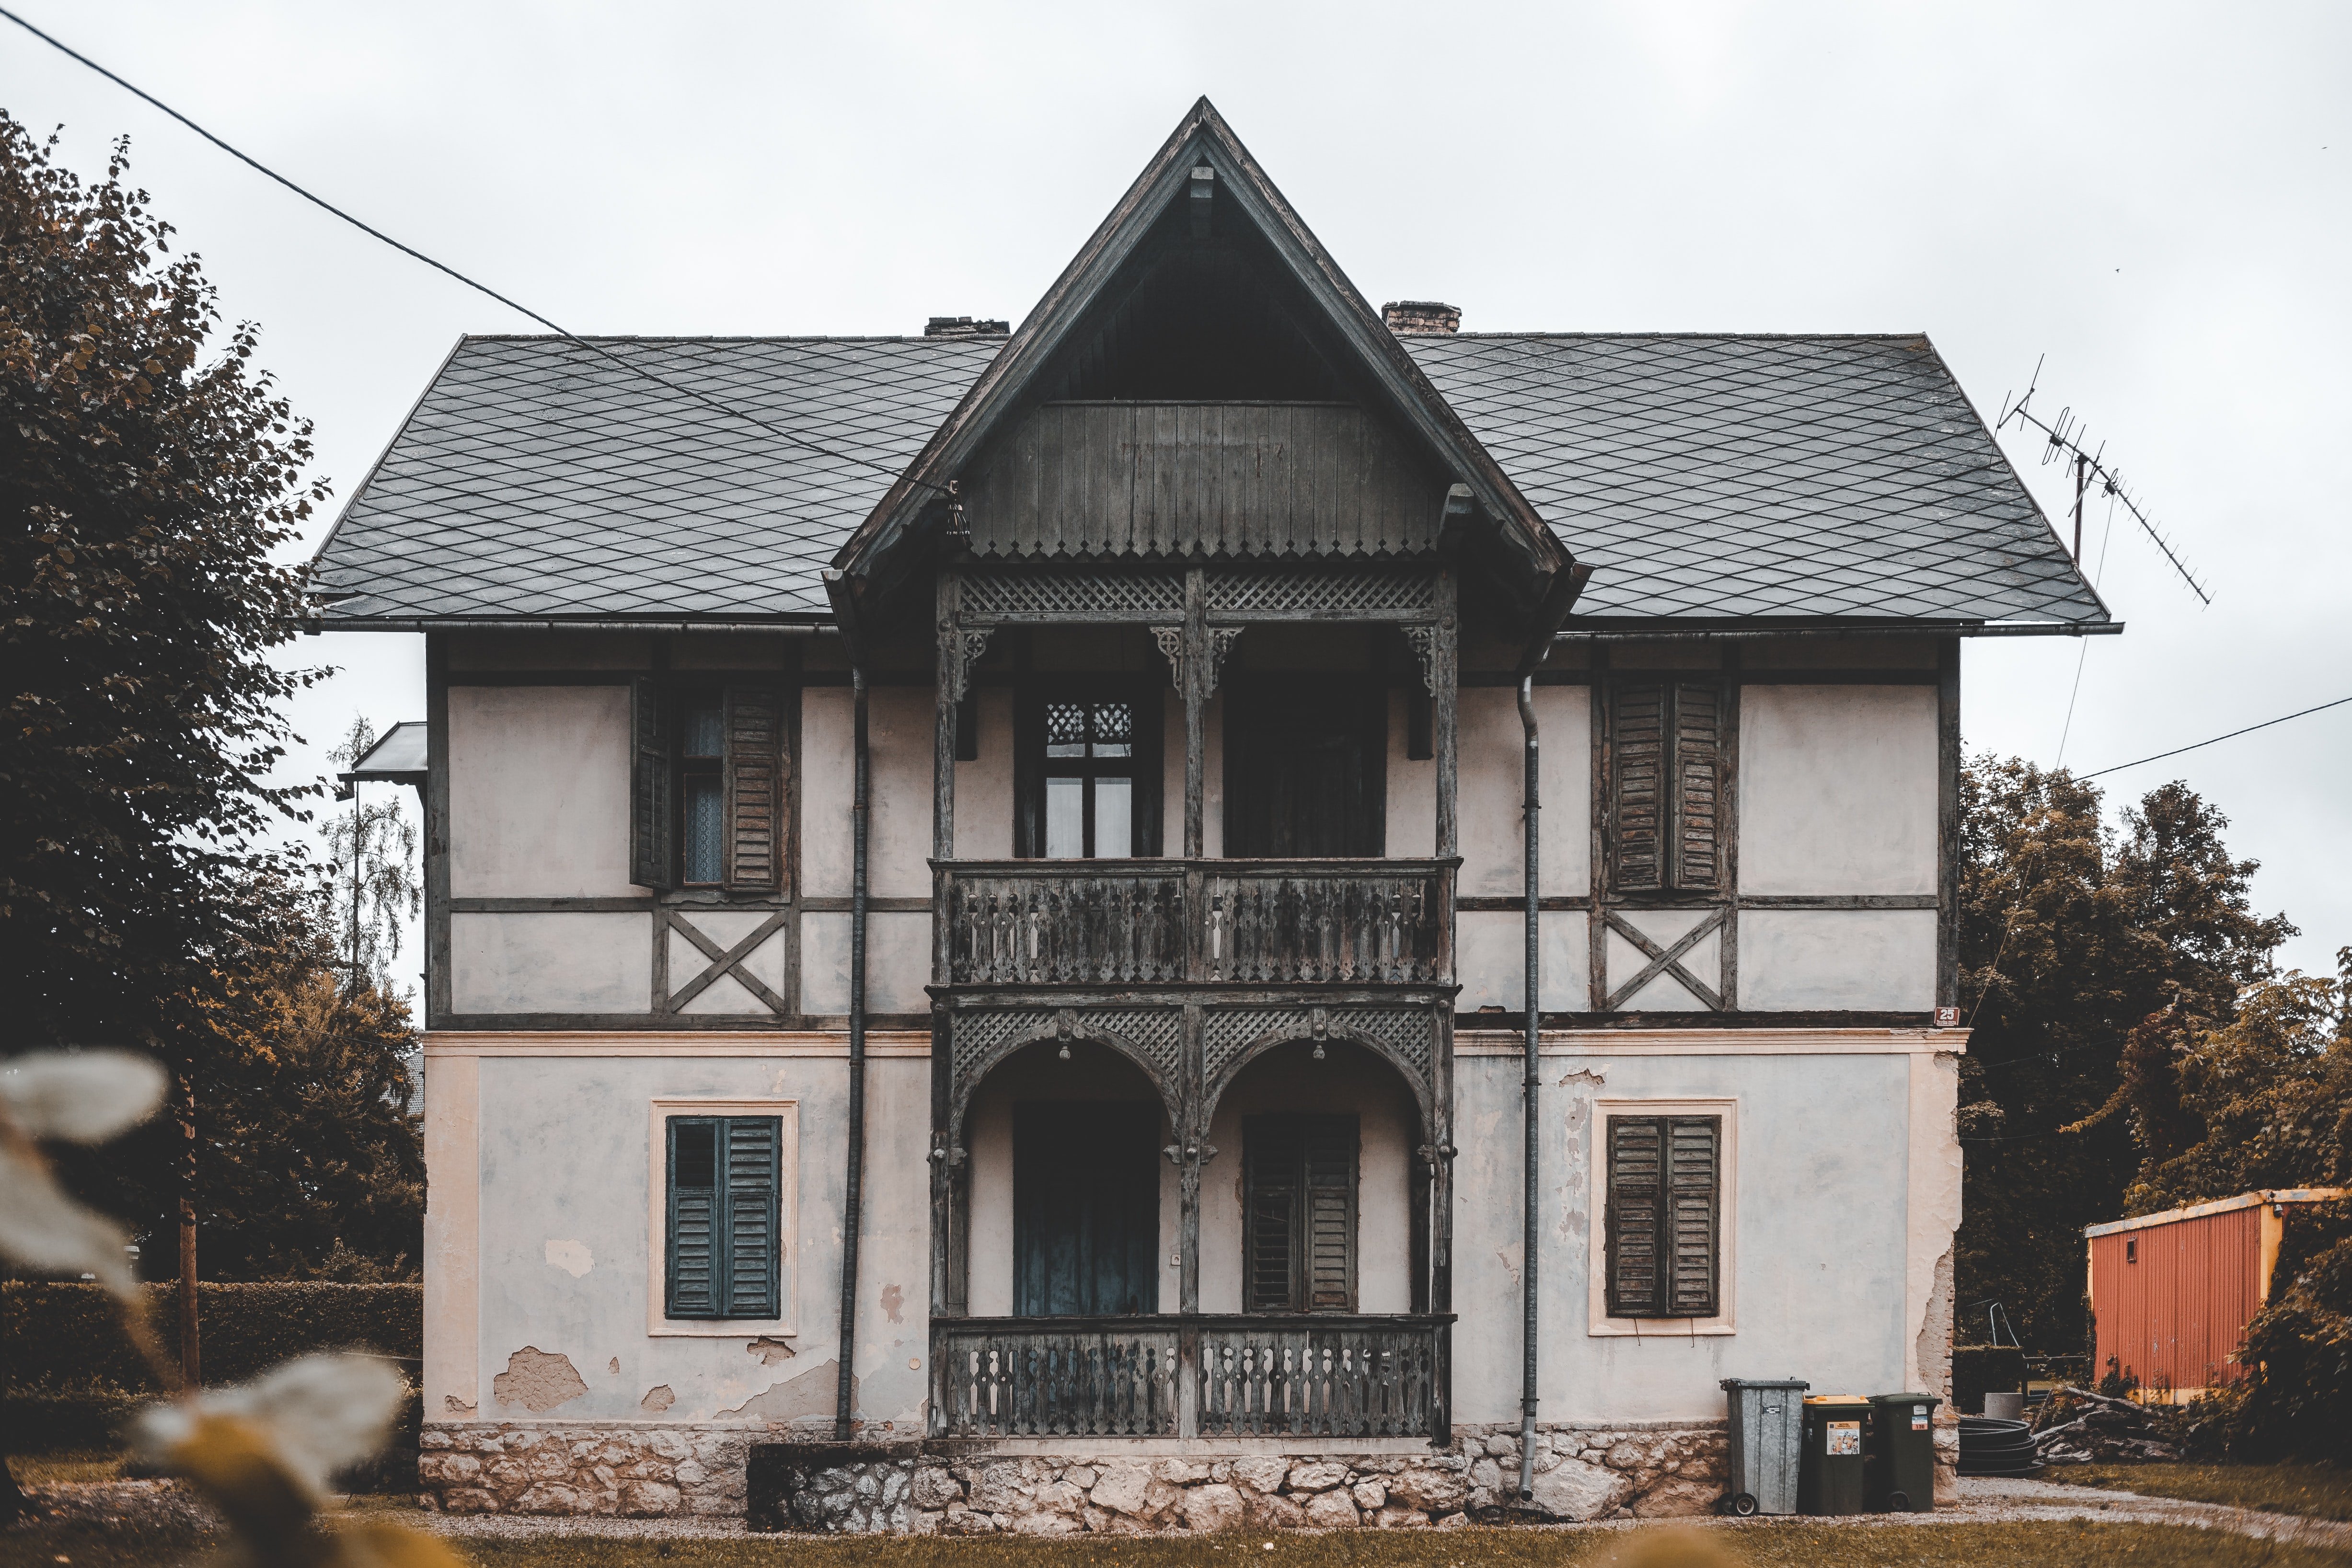 Edward bought an old house nobody was interested in buying. | Source: Unsplash